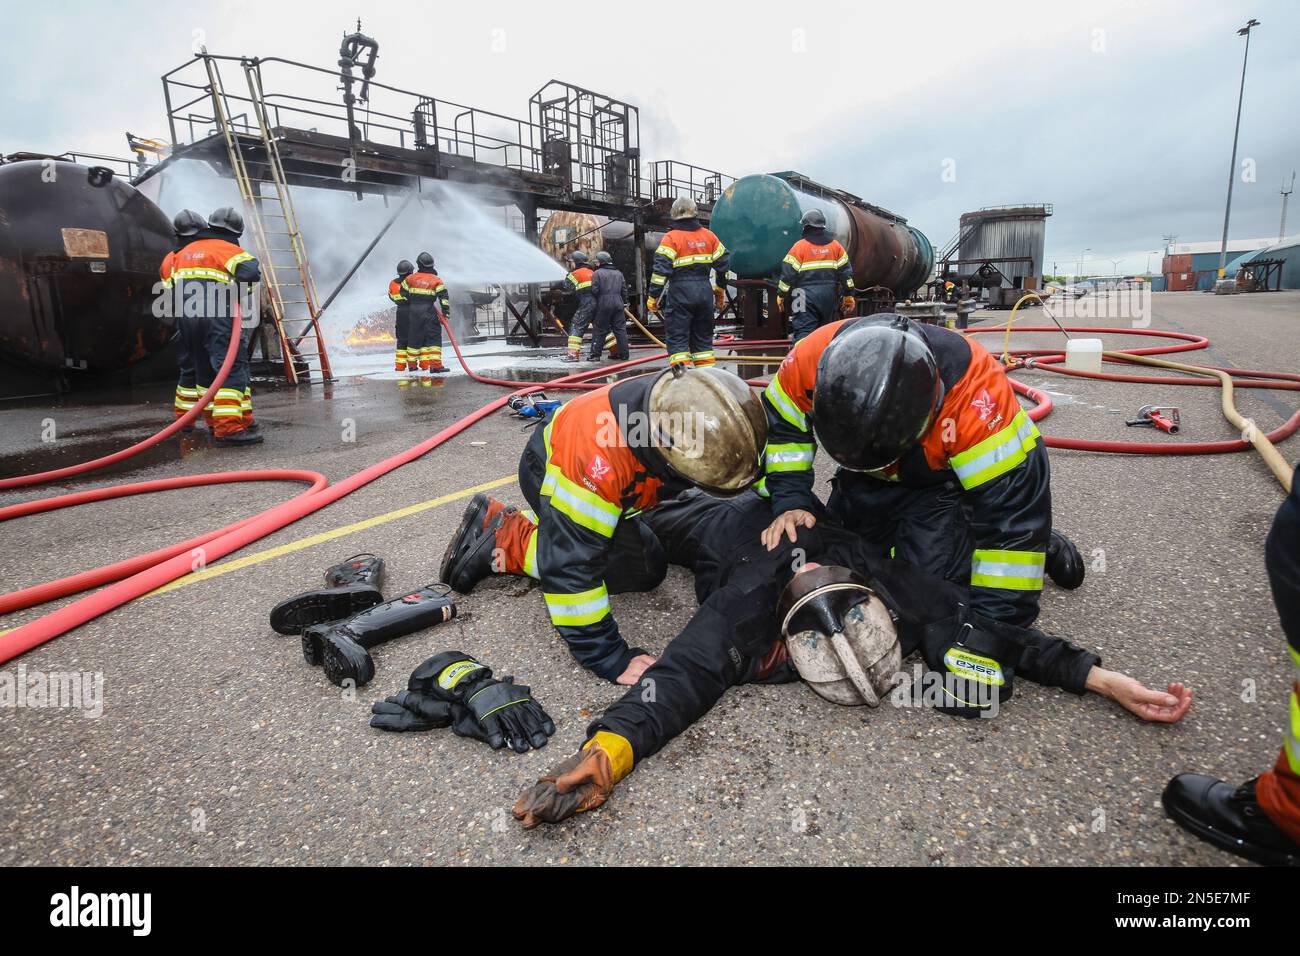 Industrial firefighting training at Falck Fire Academy, now called RelyOn Nutec in Rotterdam harbour with international training standards. Stock Photo